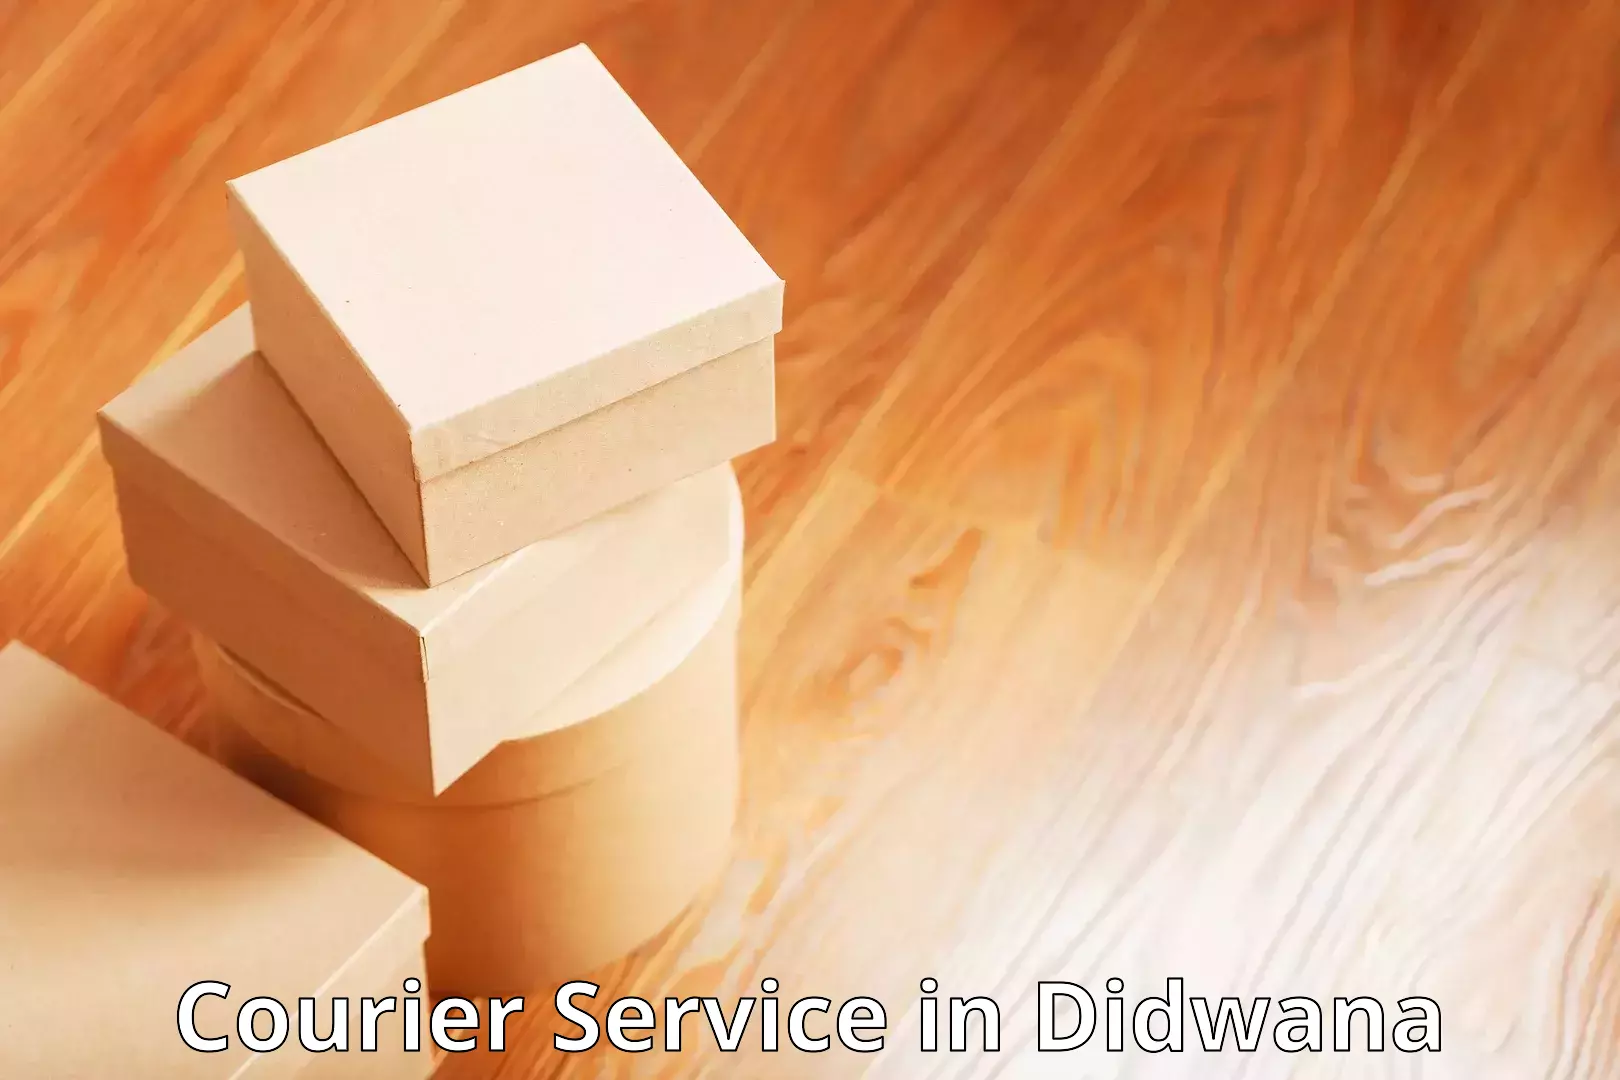 Reliable delivery network in Didwana